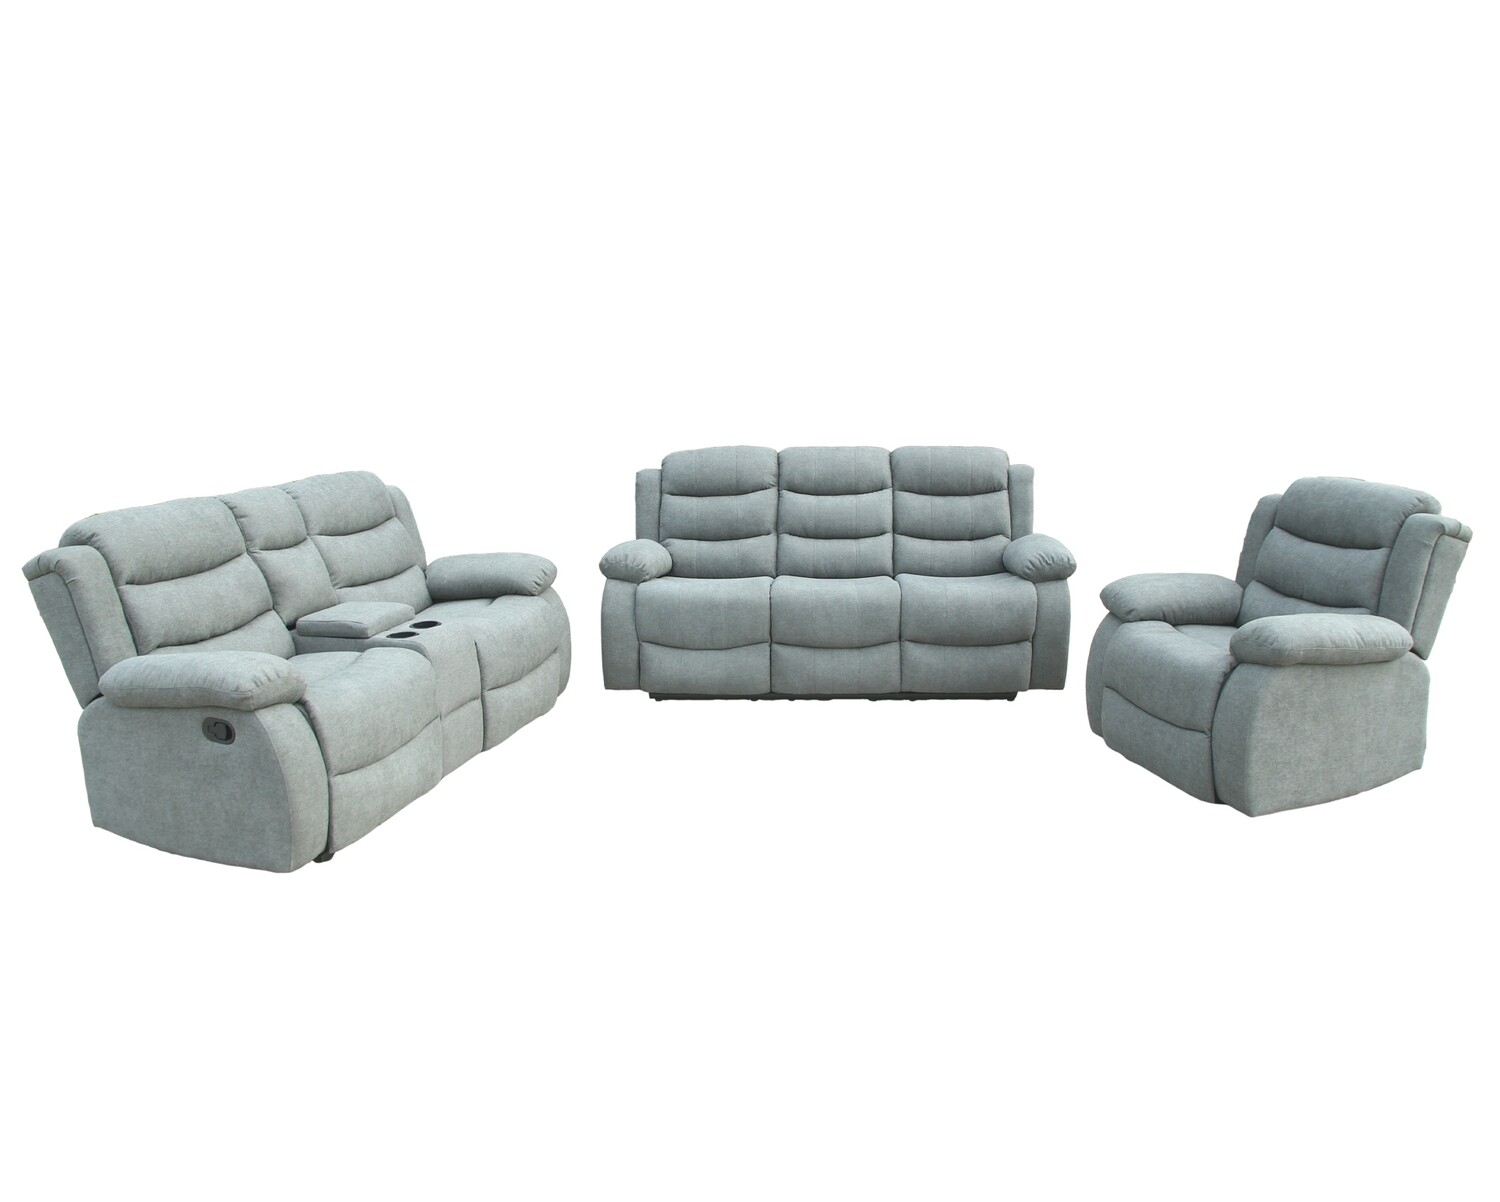 Flotti Chantria 1-Seater/ Love Seat/ 3-Seater with Drop Down Table Manual Recliner (Grey)